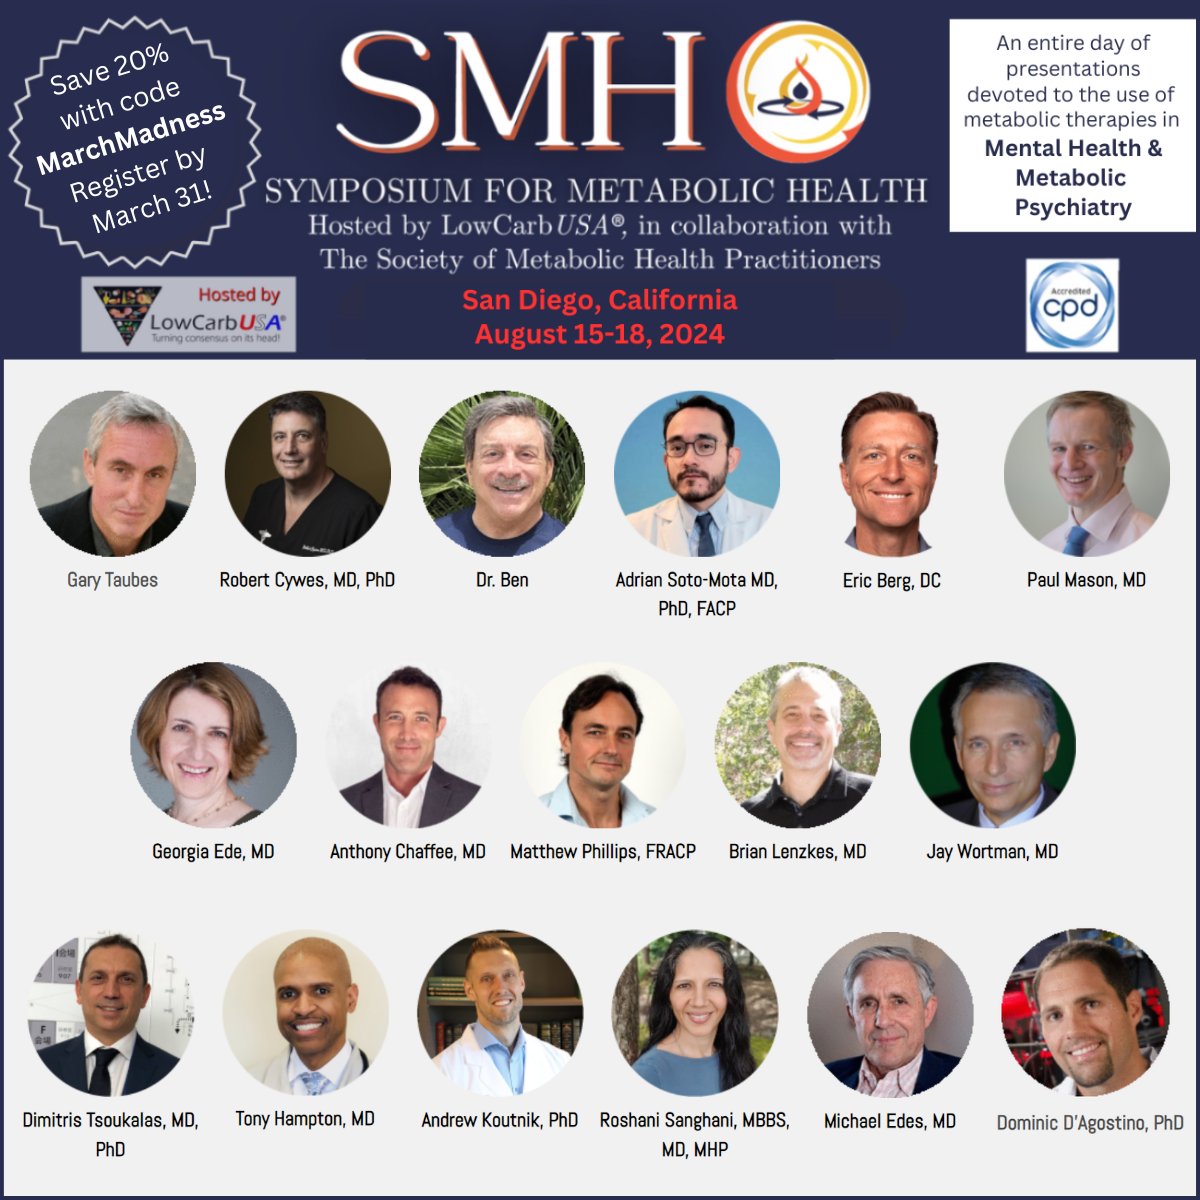 The 9th Annual San Diego Symposium for Metabolic Health will be held August 15-18, 2024, and there is still time to save 20% off tickets, low-carb dinners, and optional CME credits! Register by March 31 to save! This year's Symposium will devote one full day to metabolic